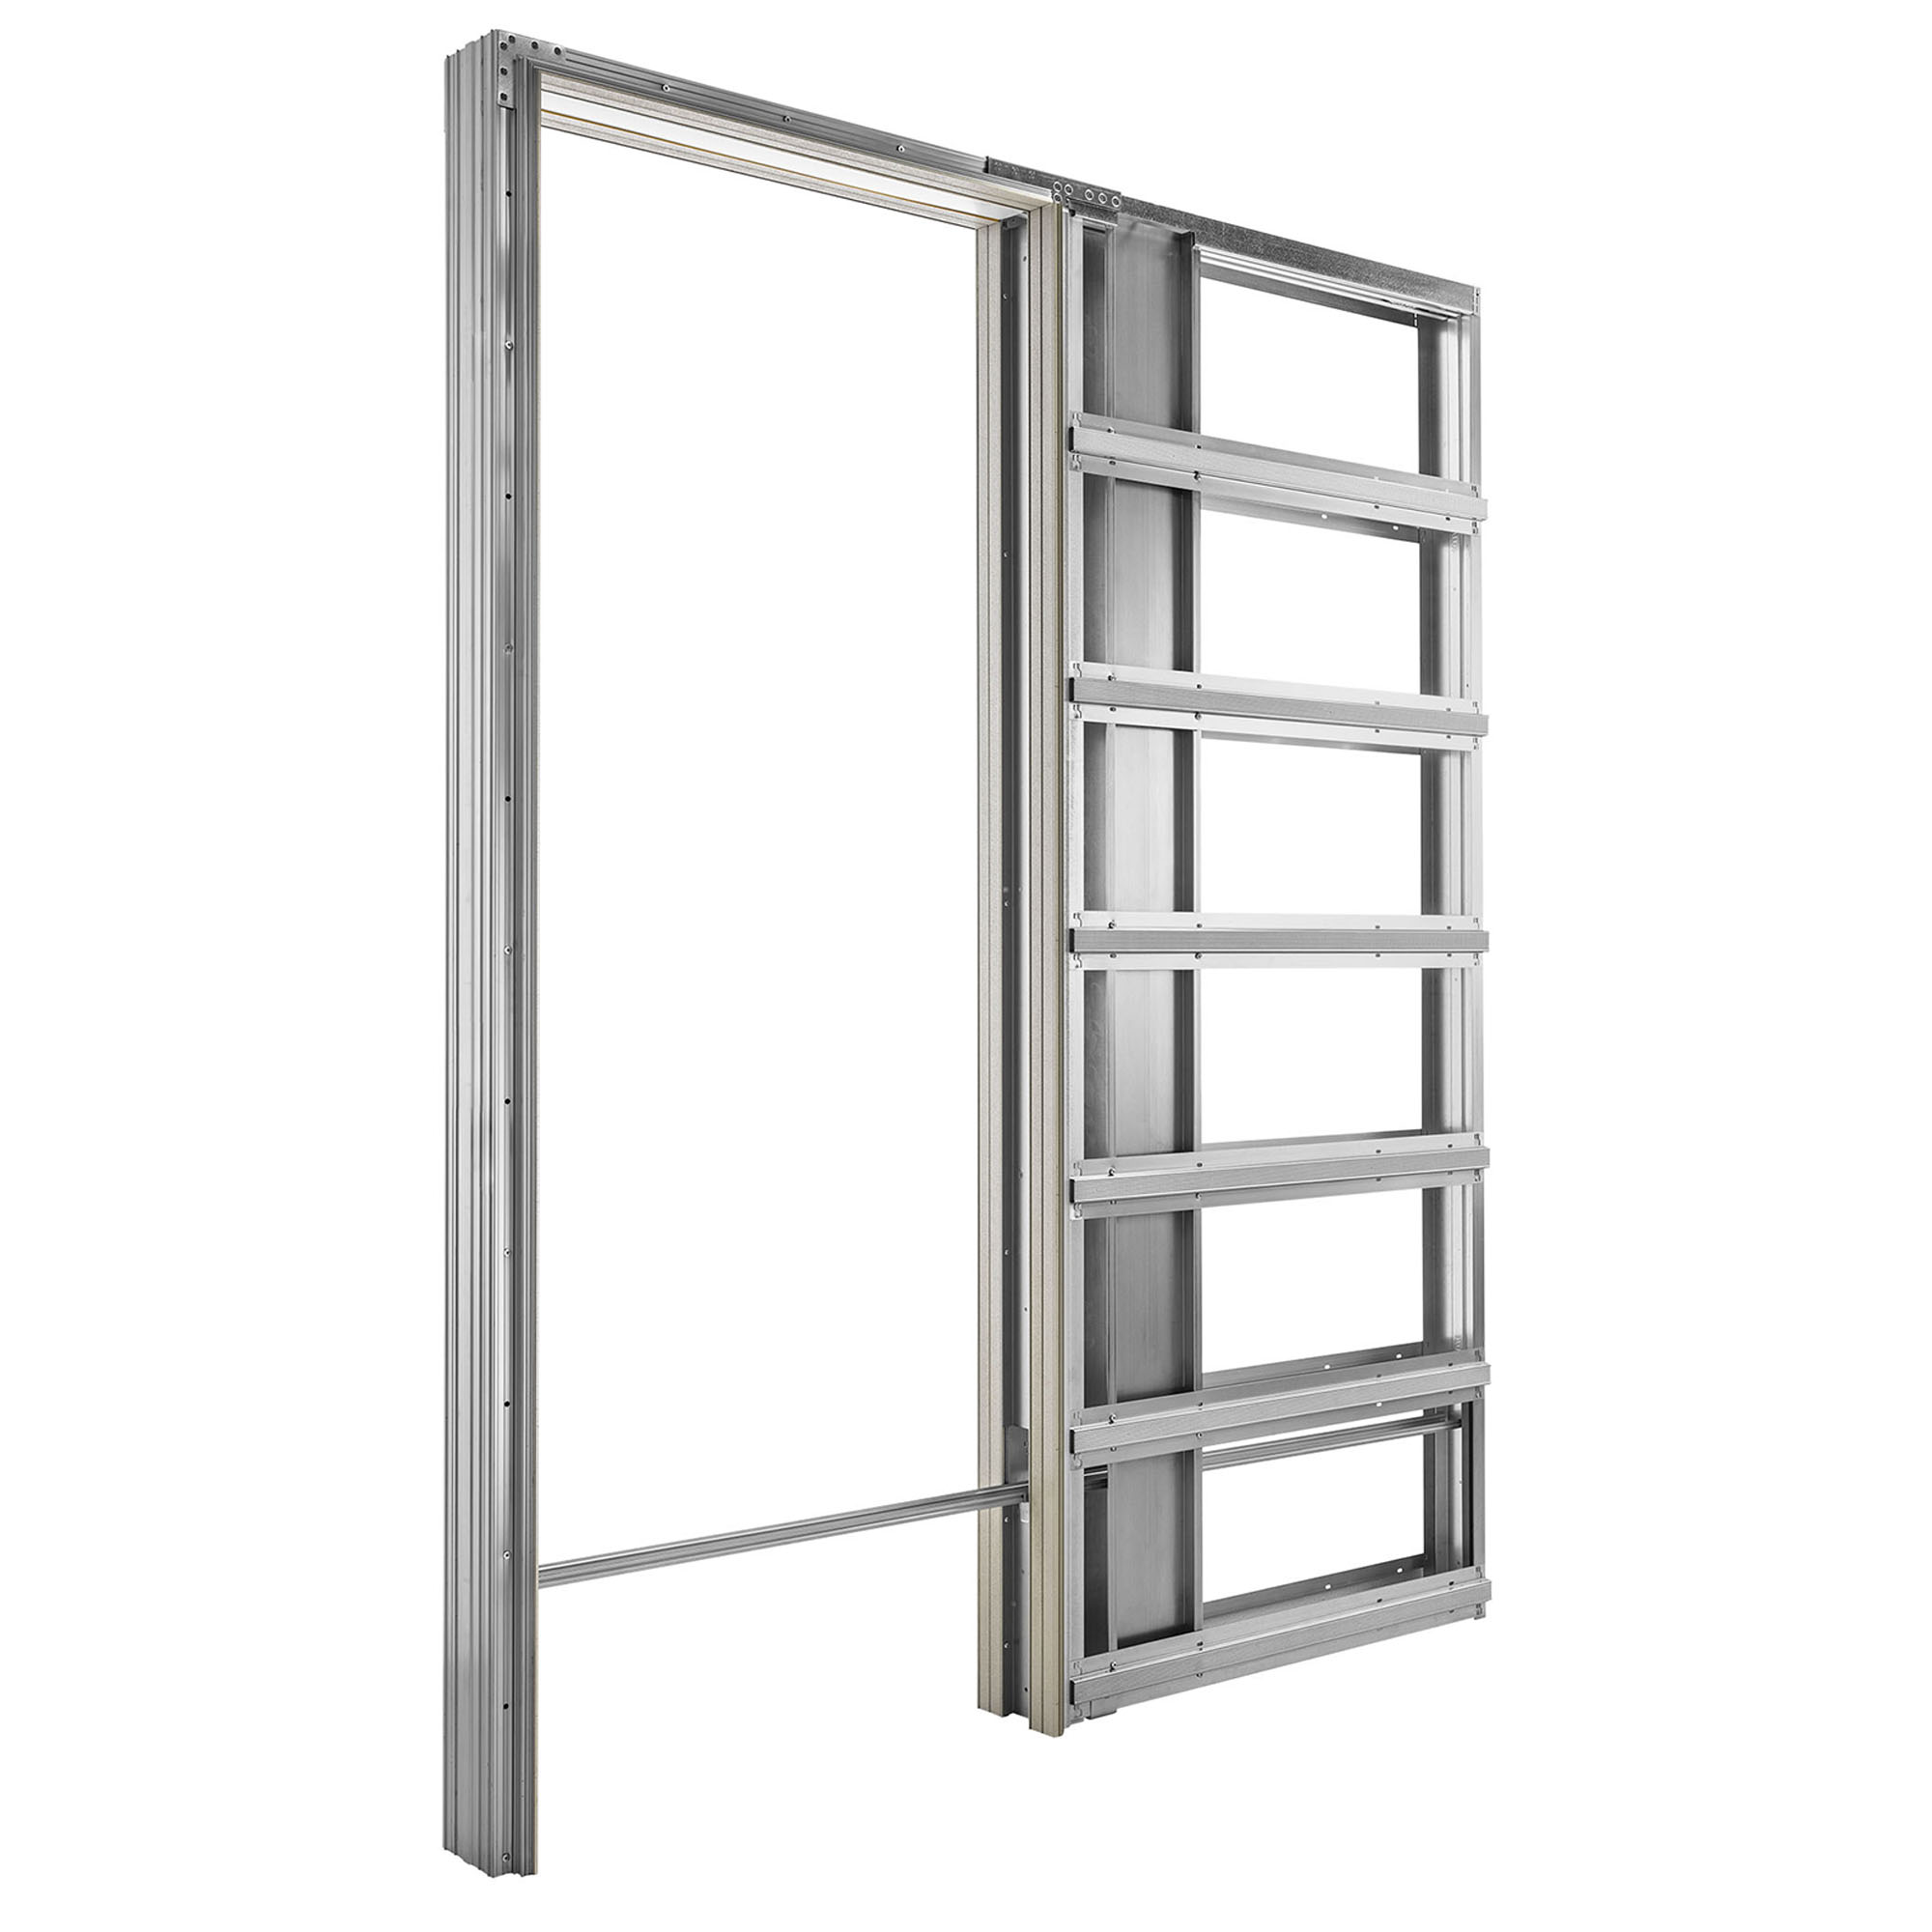 ECLISSE wiring-ready sliding pocket door system with no jambs nor architraves